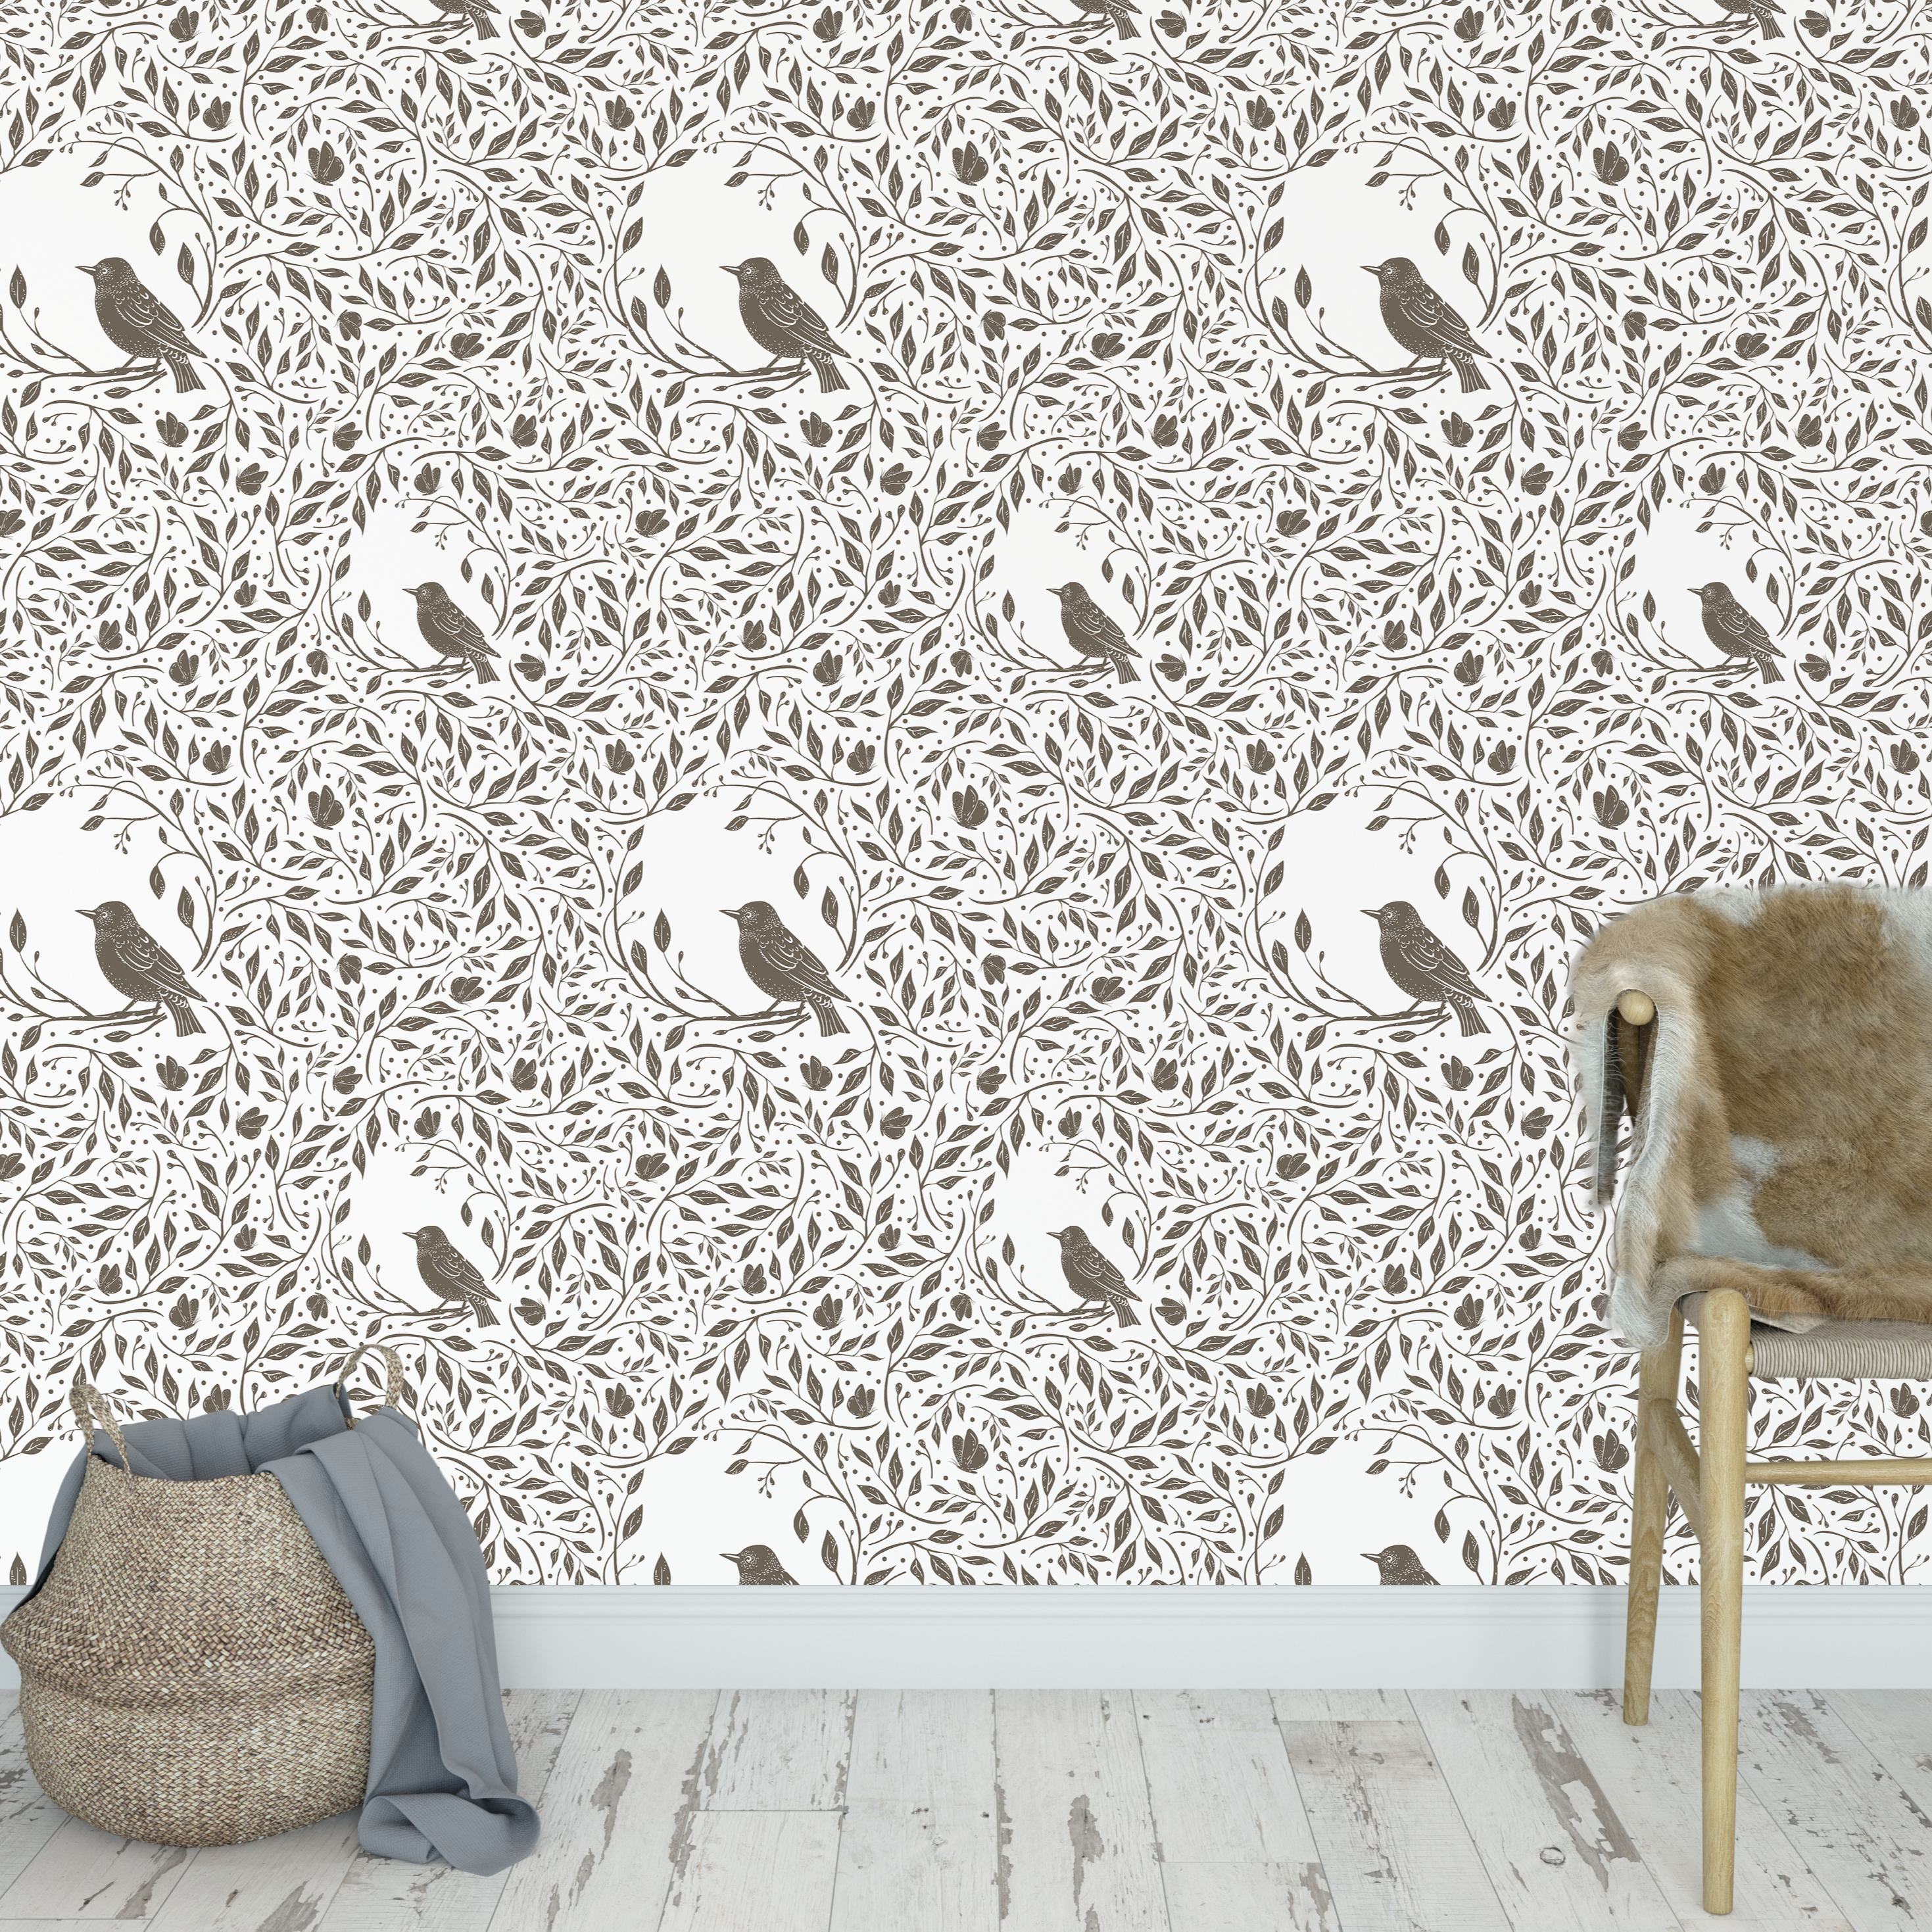 floral bird removable wallpaper Peel and stick wallpaper, wallpaper, peel and stick wall paper